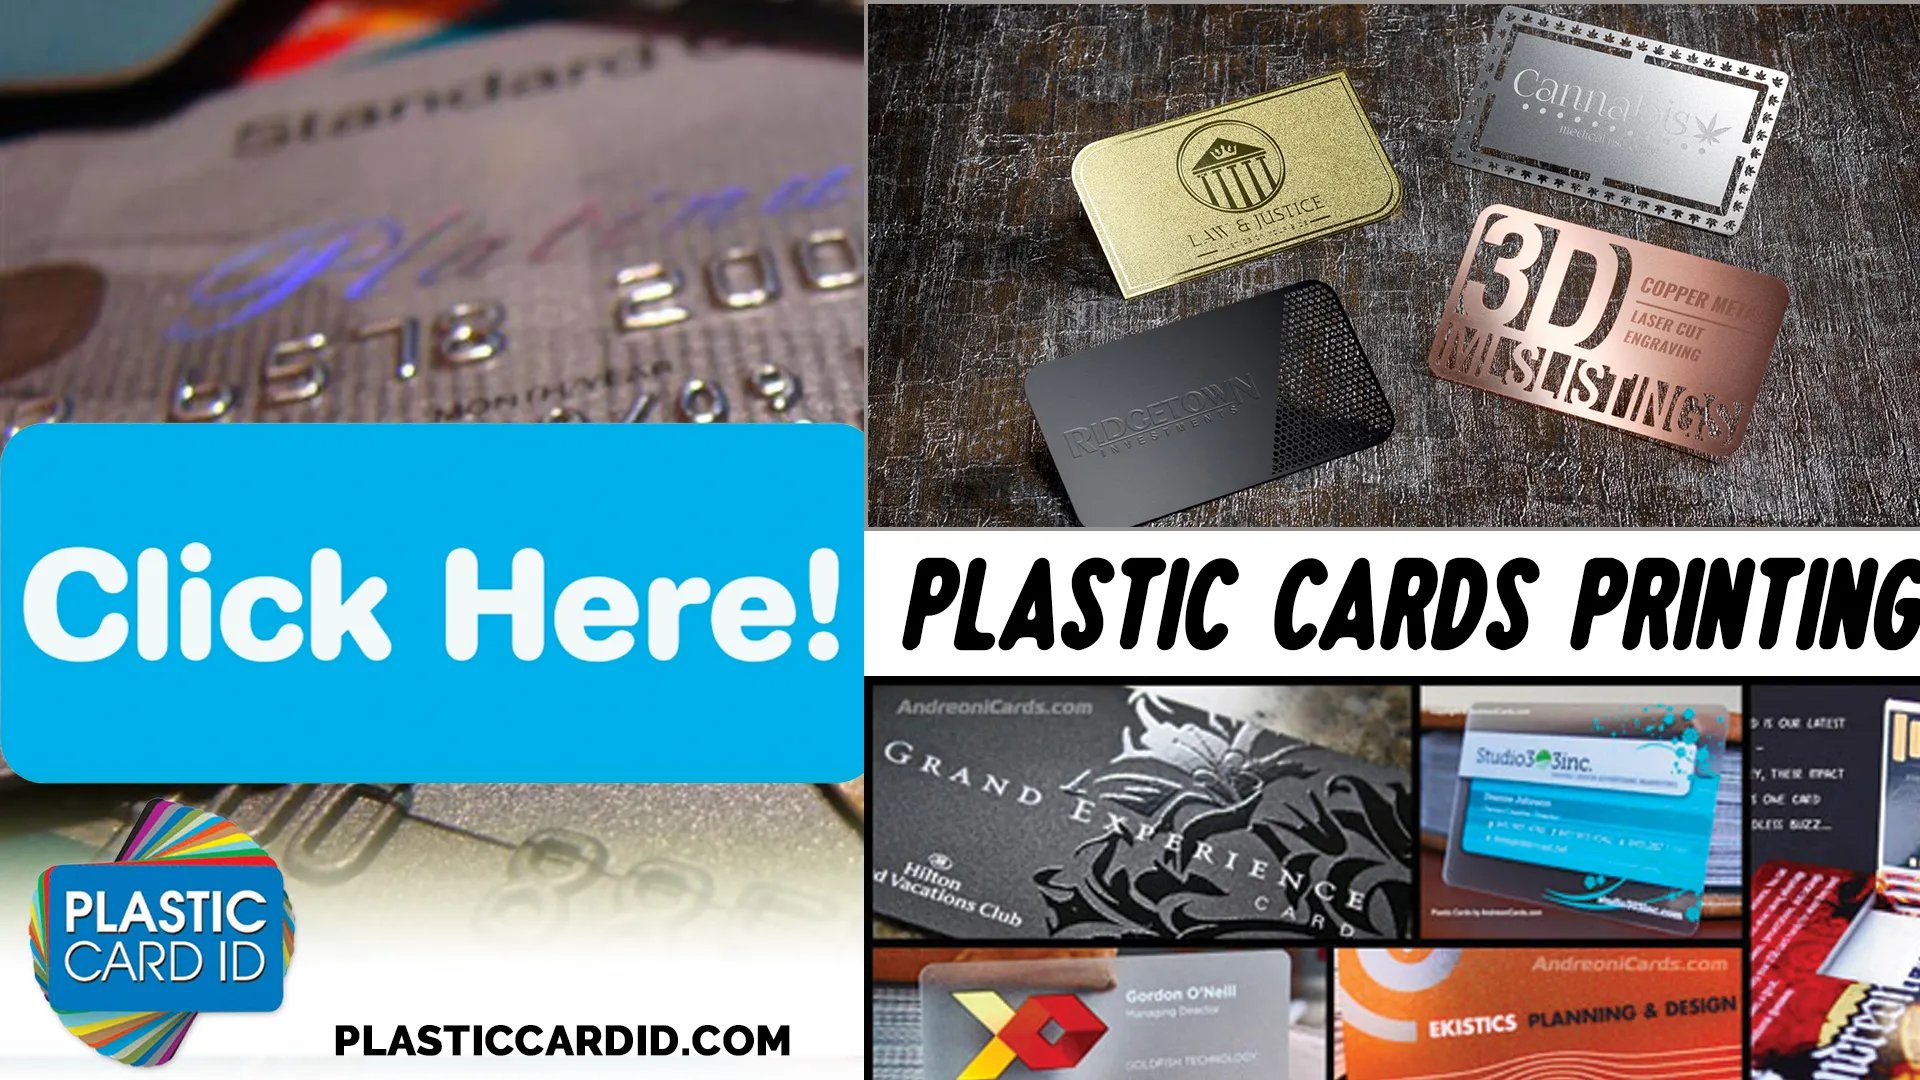 Welcome to the Innovative World of Creative Marketing with Plastic Cards